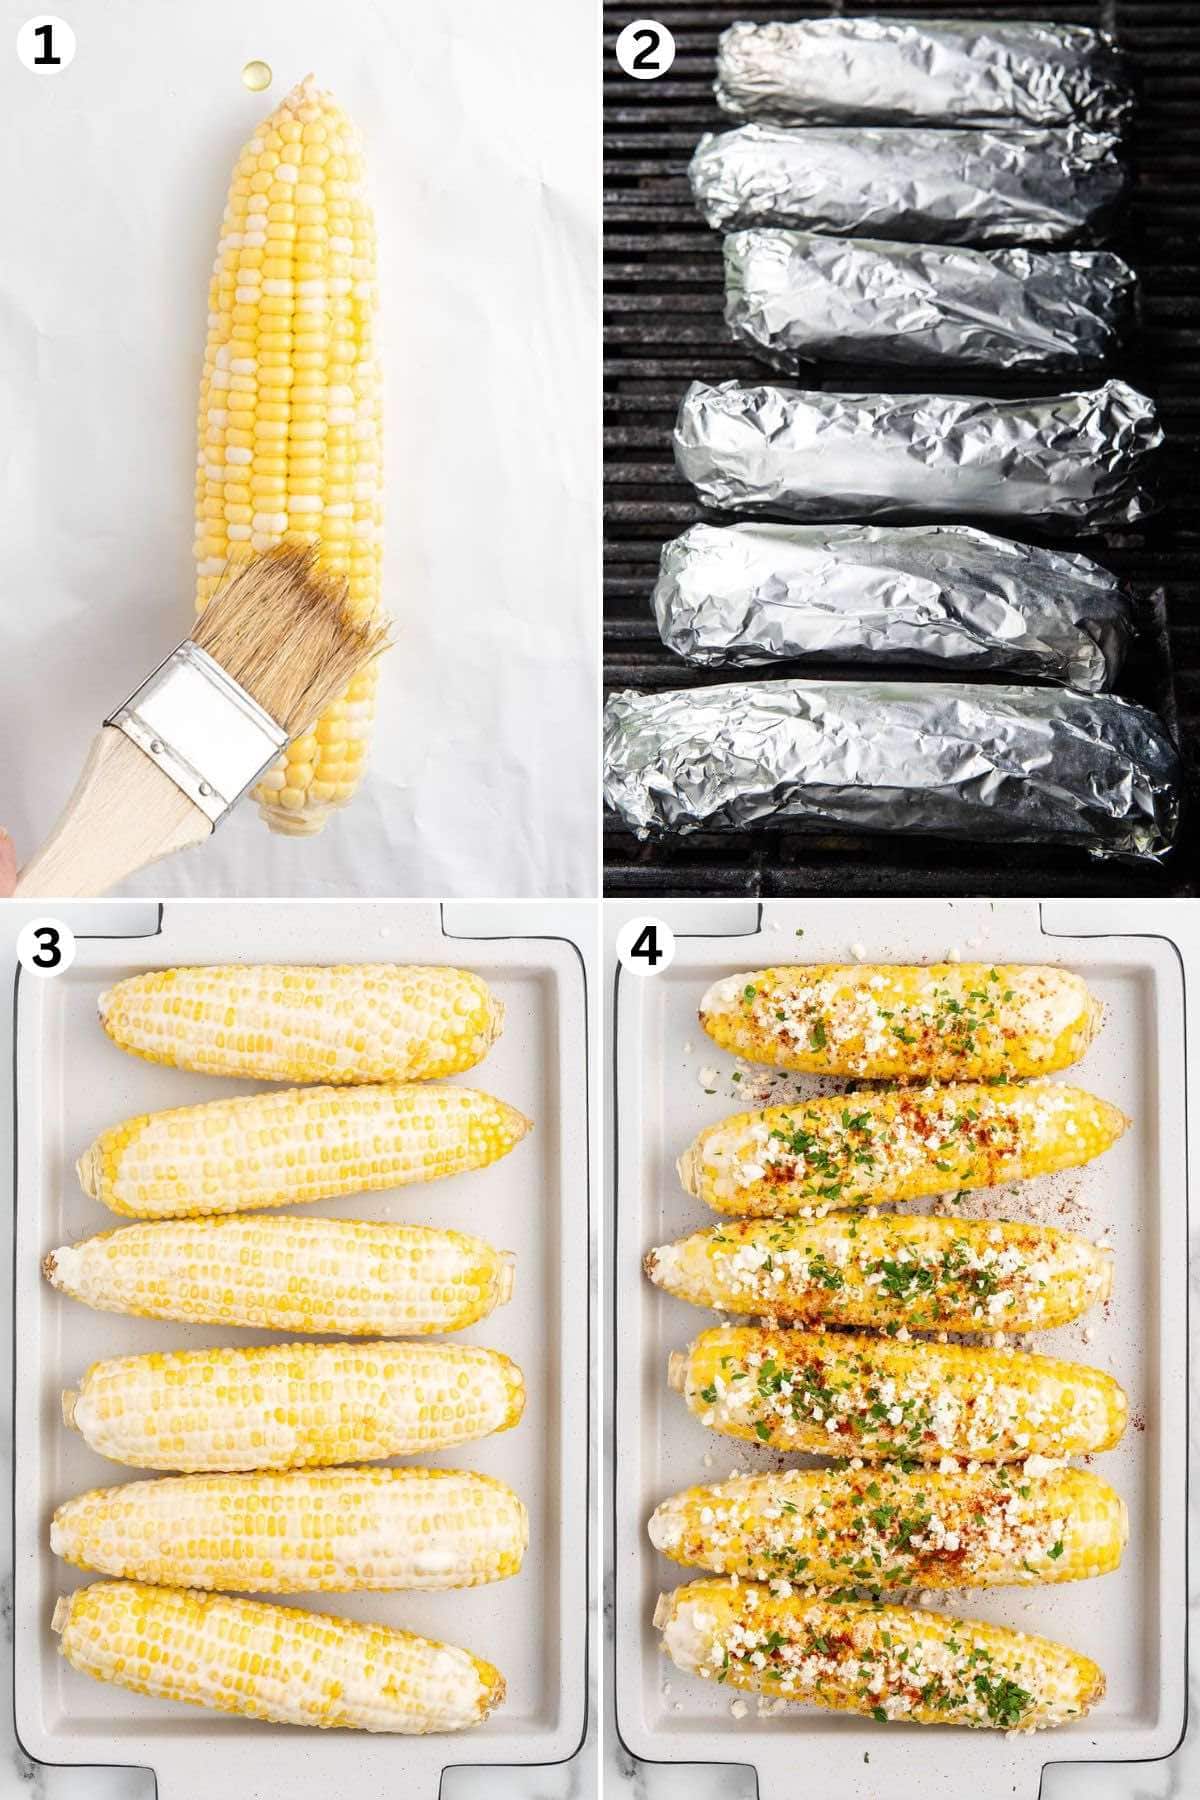 brush the corn with oil and salt. wrap in aluminum foil and grill. brush with mexican crema and sprinkle with chili powder, cotija cheese, fresh parsley.